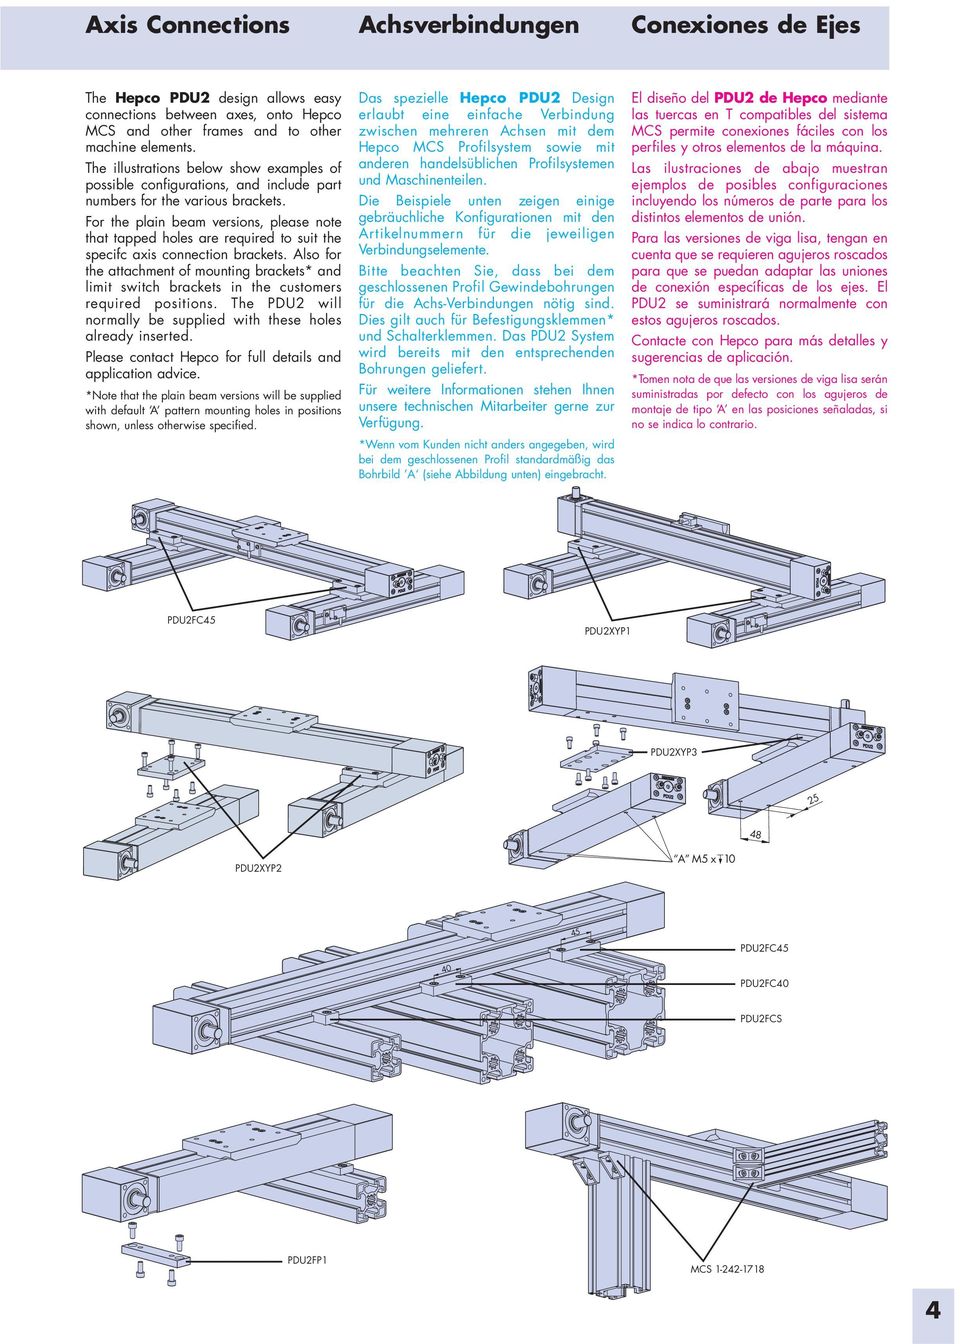 For the plain beam versions, please note that tapped holes are required to suit the specifc axis connection brackets.